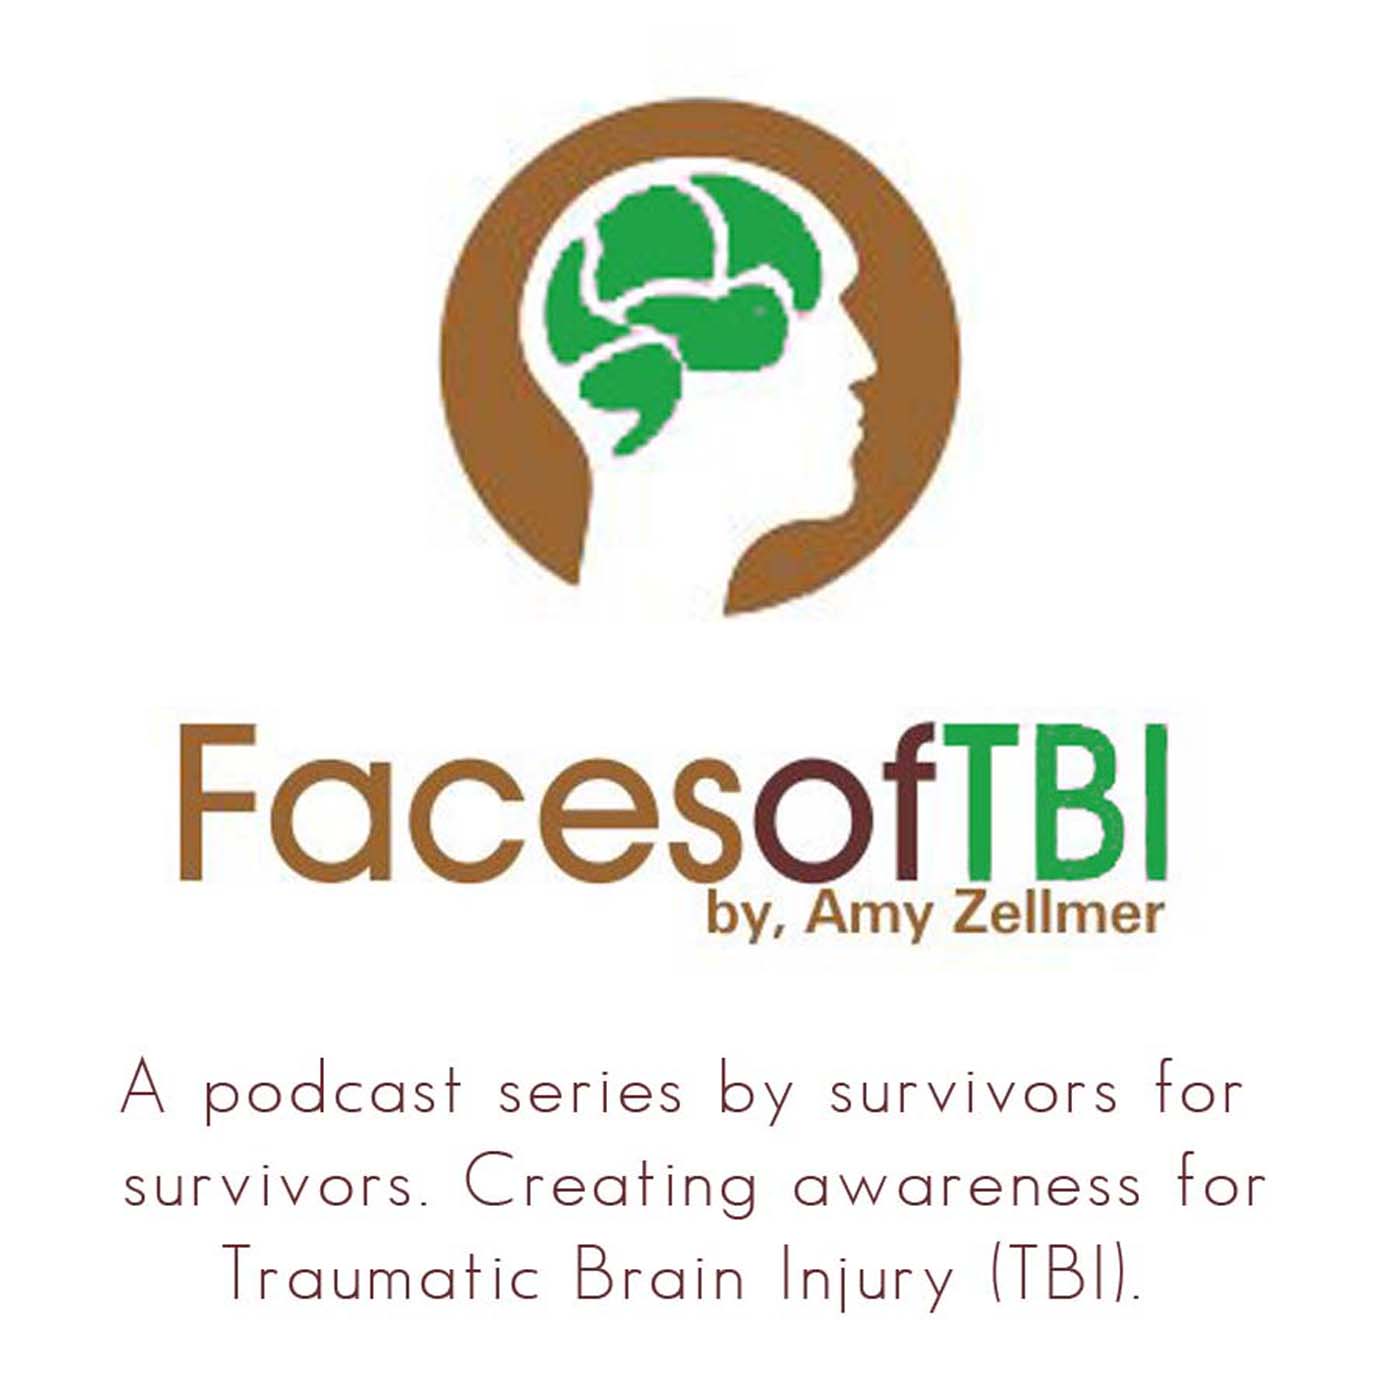 Faces of TBI